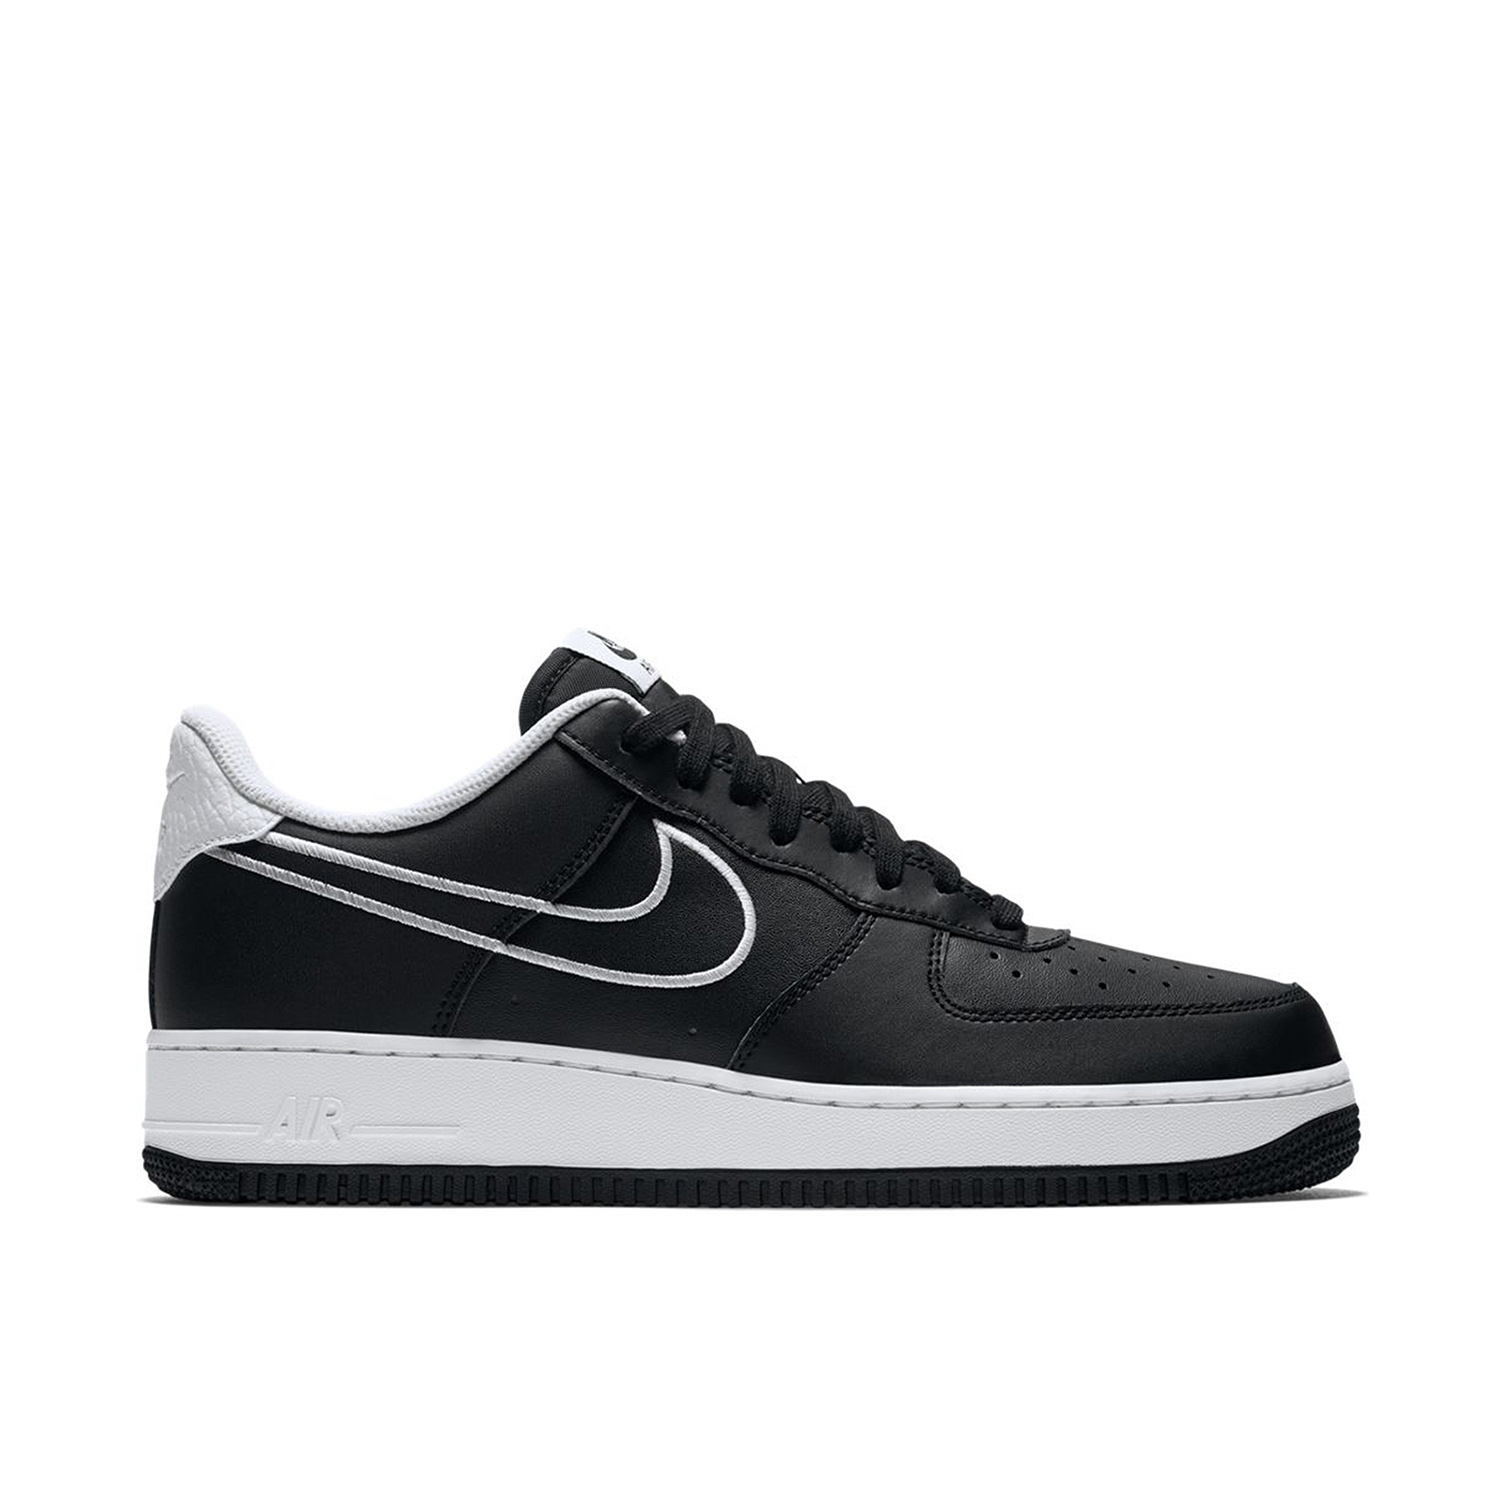 Nike Air Force 1 07 Low Leather Black White | AJ7280-001 | Laced